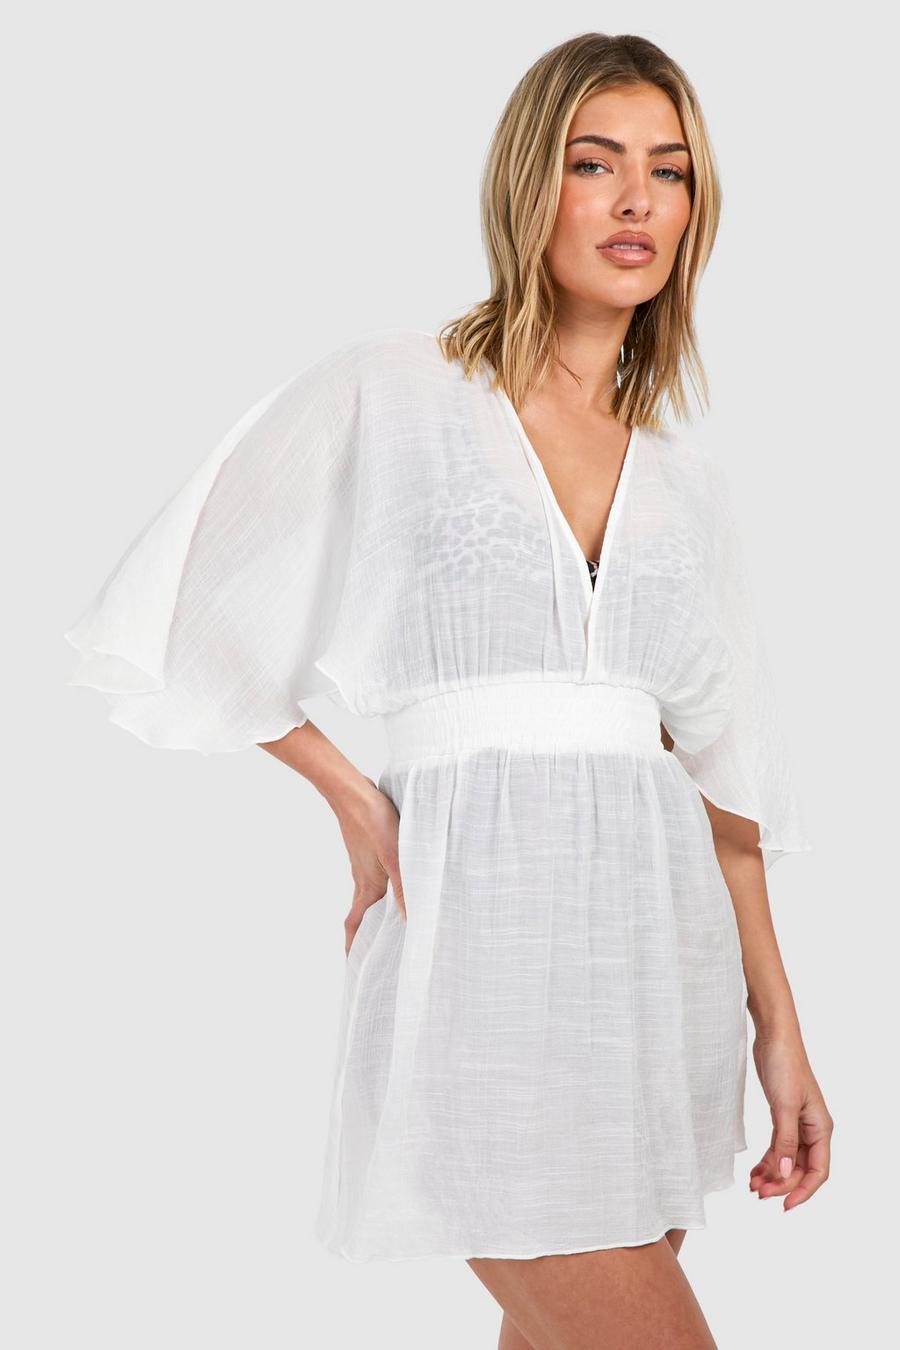 White Linen Look Cover-up Beach Dress image number 1